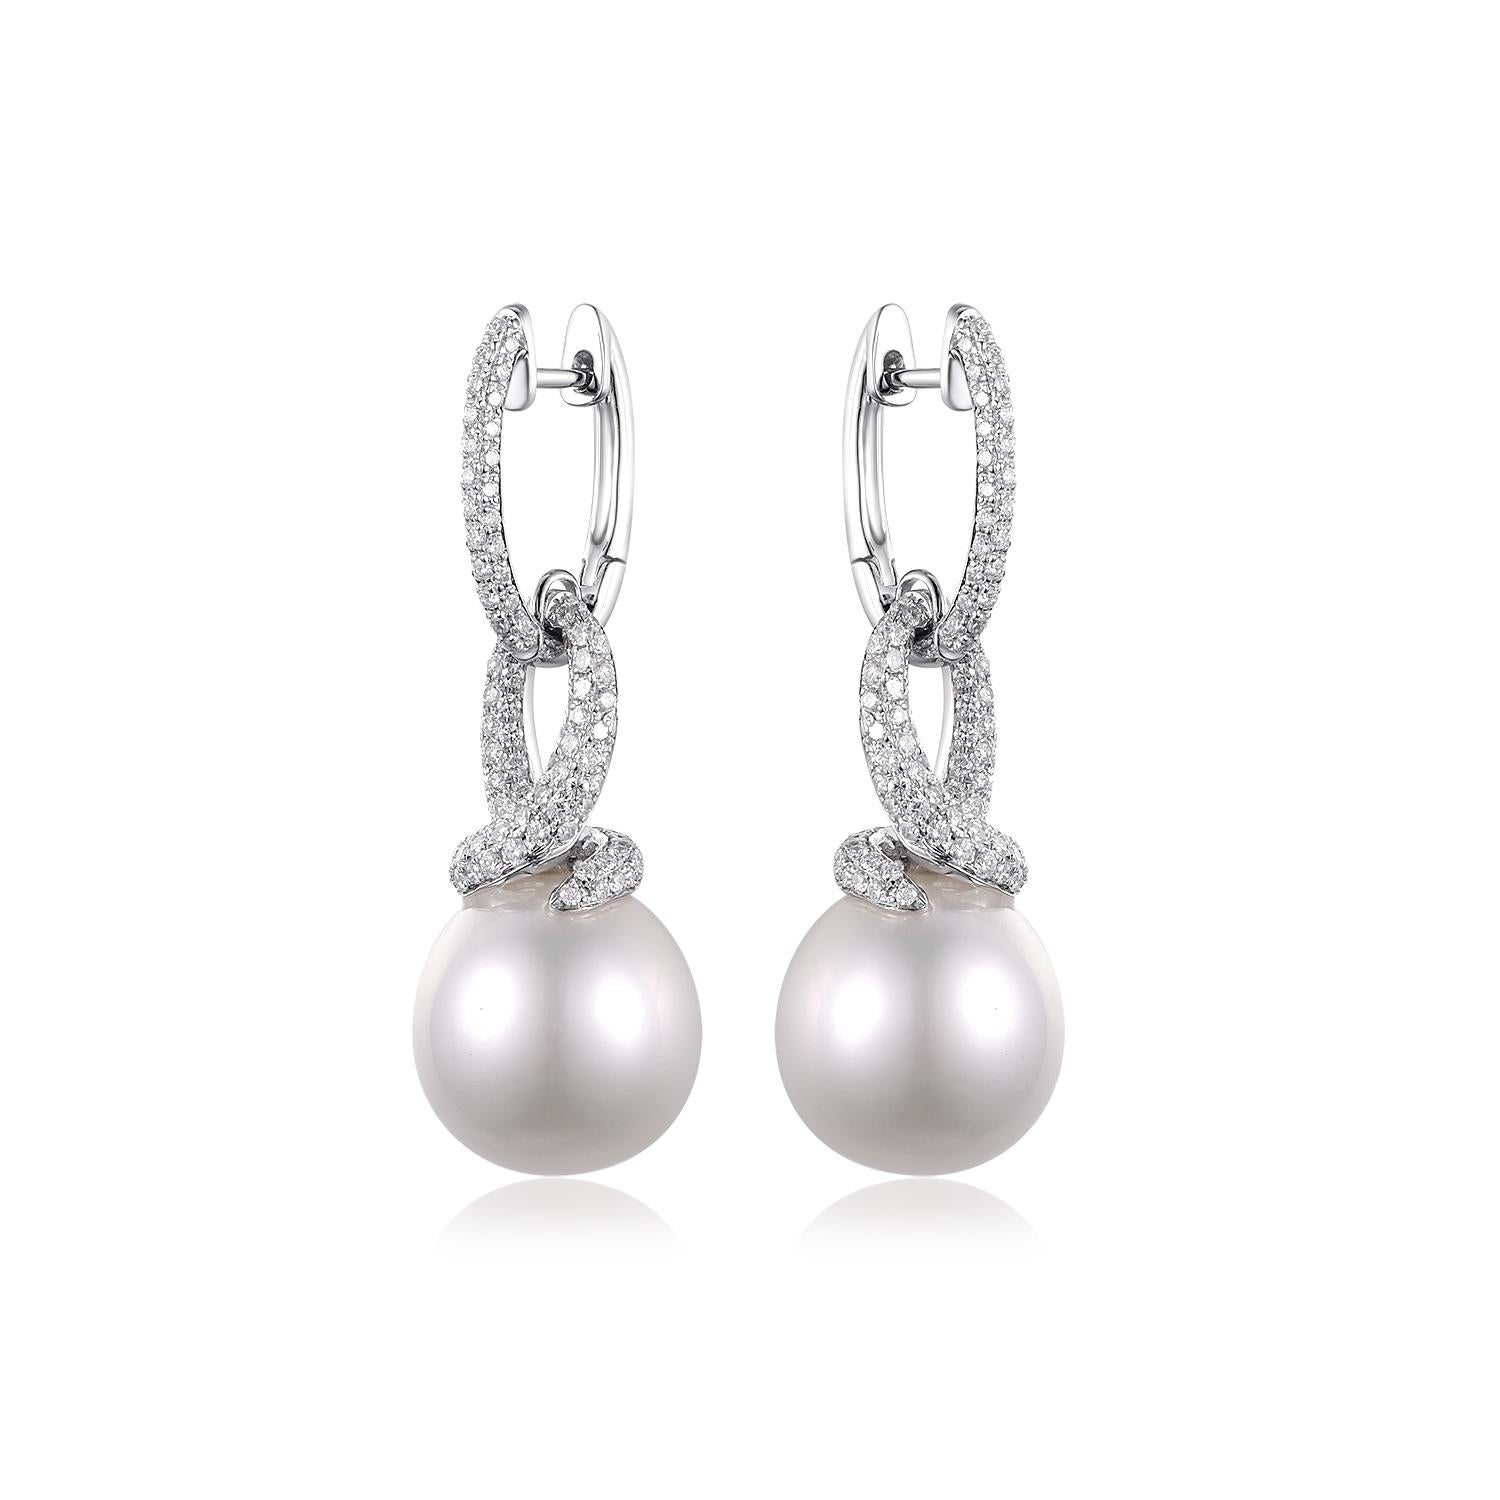 Unveiling the epitome of opulence and charm, these South Sea Pearl Diamond Dangle Earrings are designed to adorn your ears with unparalleled elegance and grace. They are a dazzling embodiment of luxury, featuring immaculate South Sea Pearls and